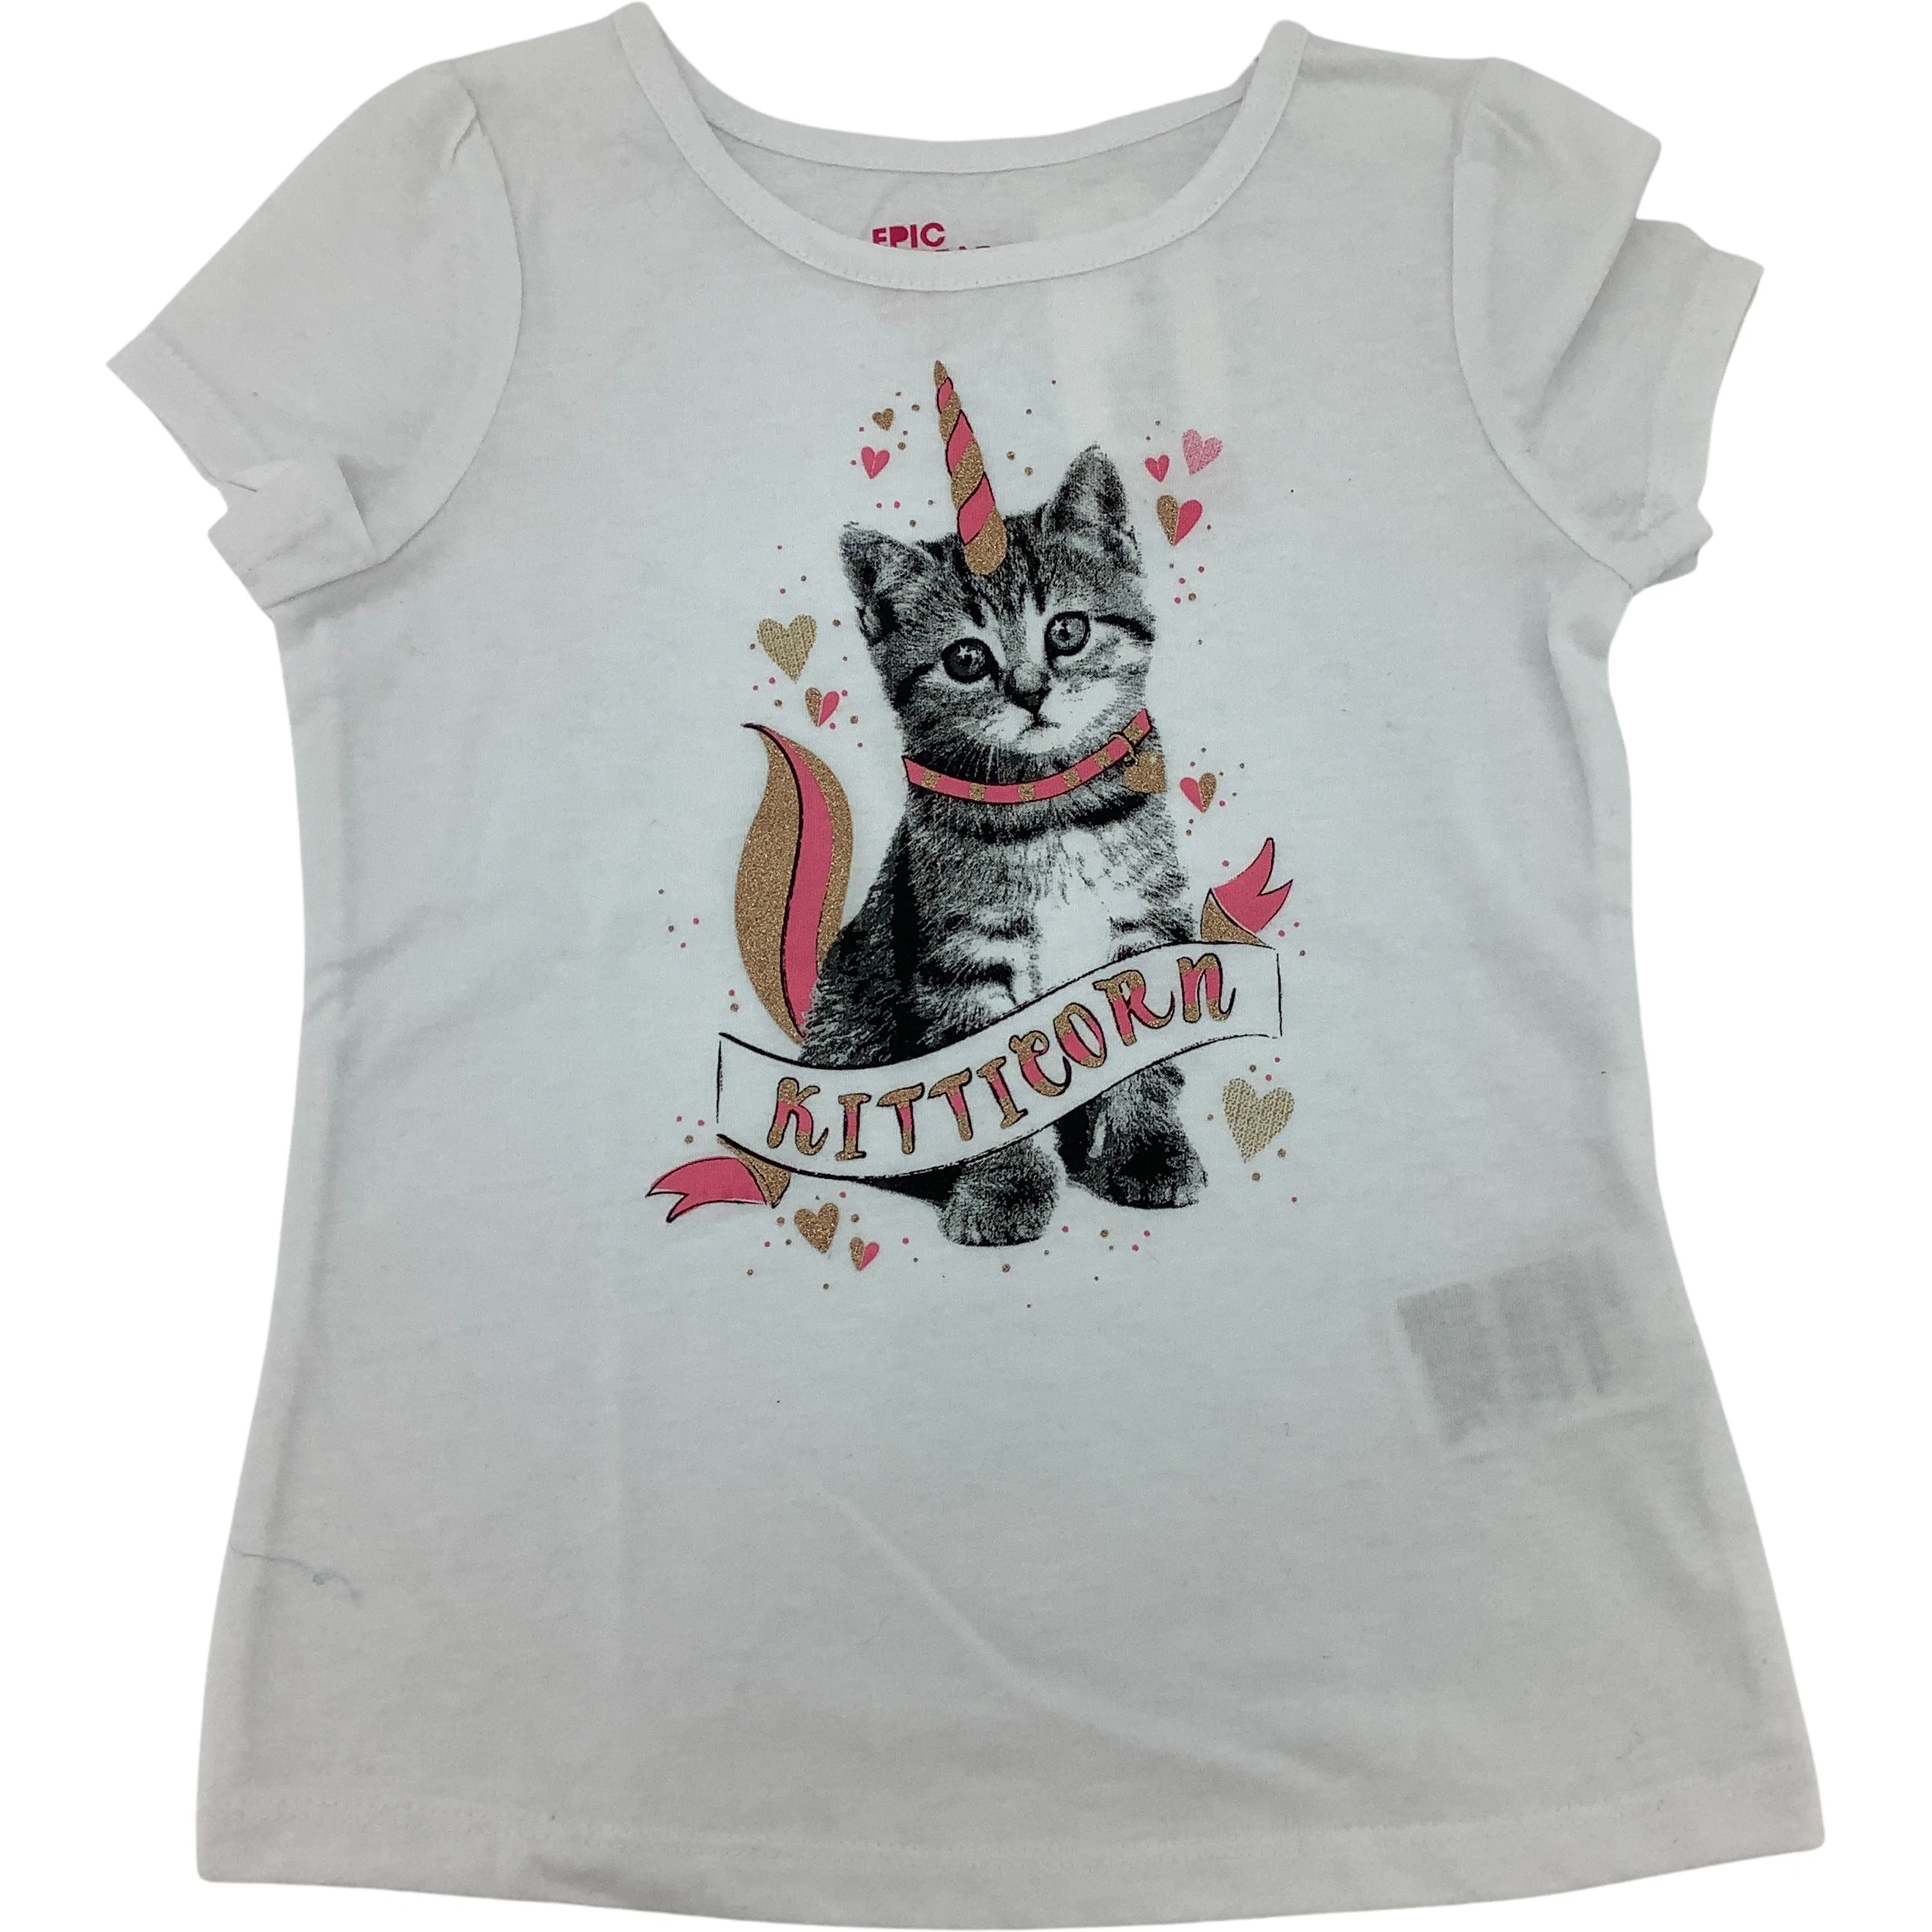 Epic Thread's Girl's T-Shirt / White / Cat Theme / Kid's Summer Clothes / Size 4T